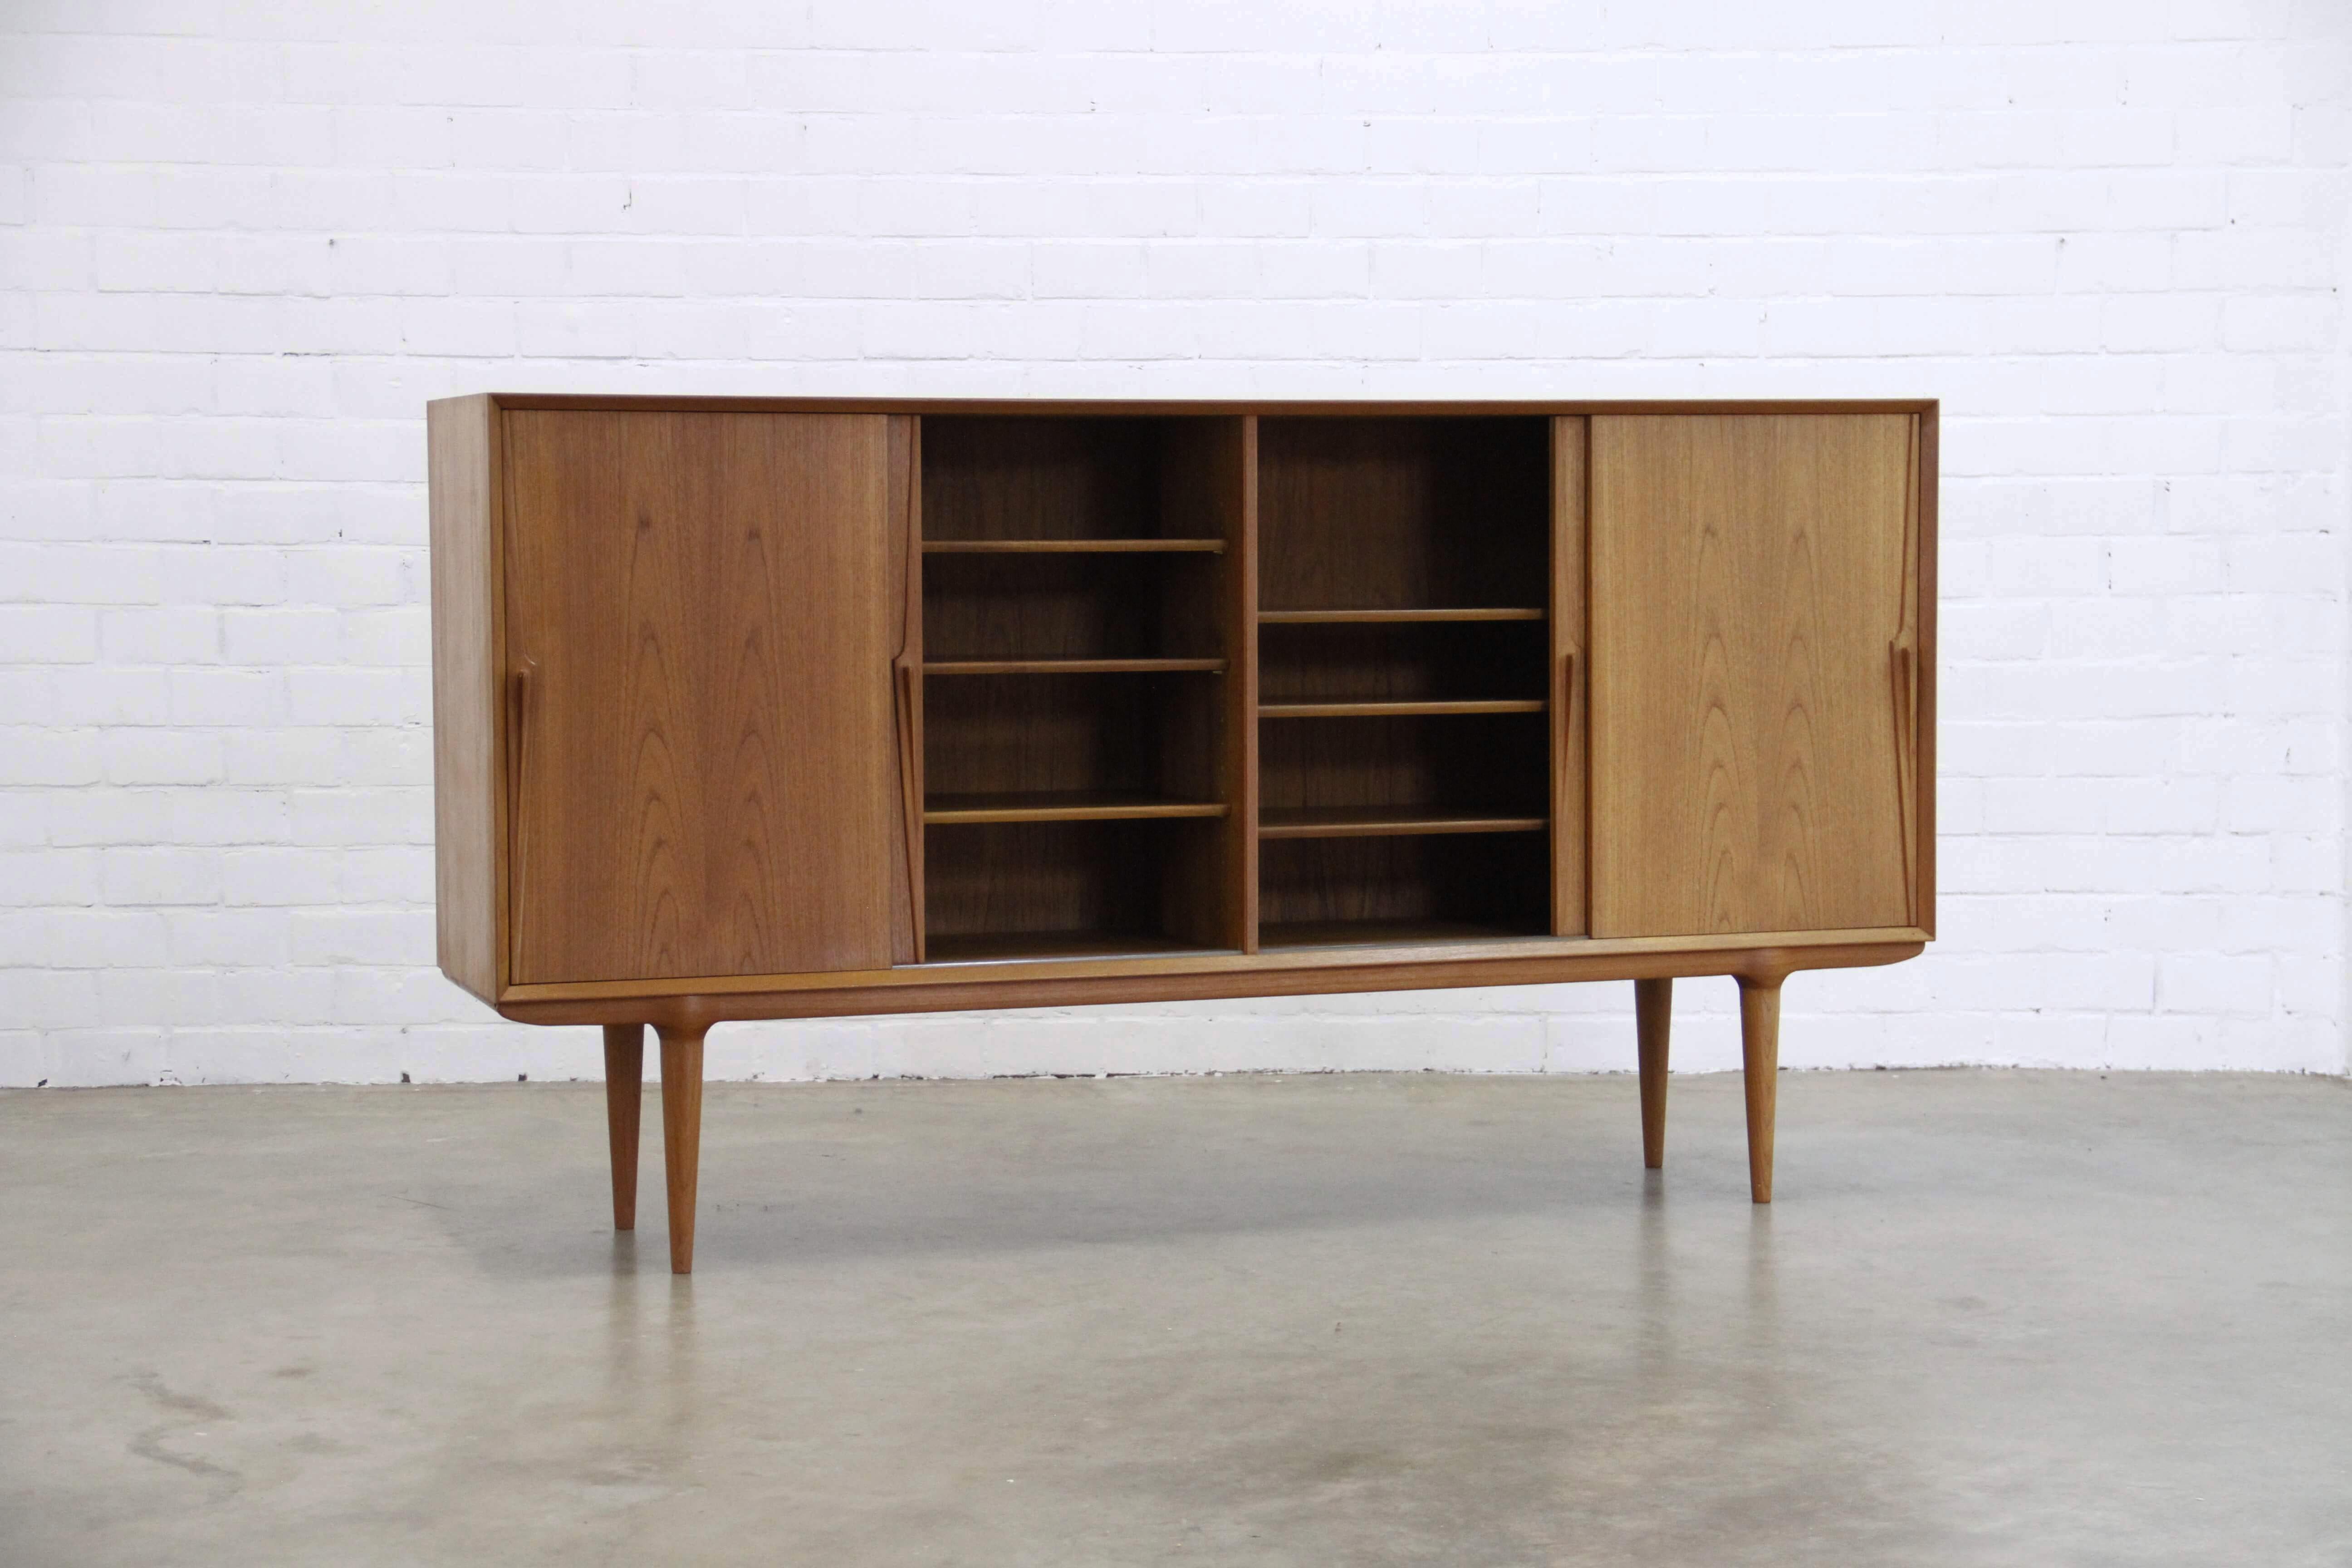 This beautiful sideboard is designed for Omann Jun Møbelfabrik in Denmark.
The sideboard has four sliding doors and built-in drawers.
Model 19.